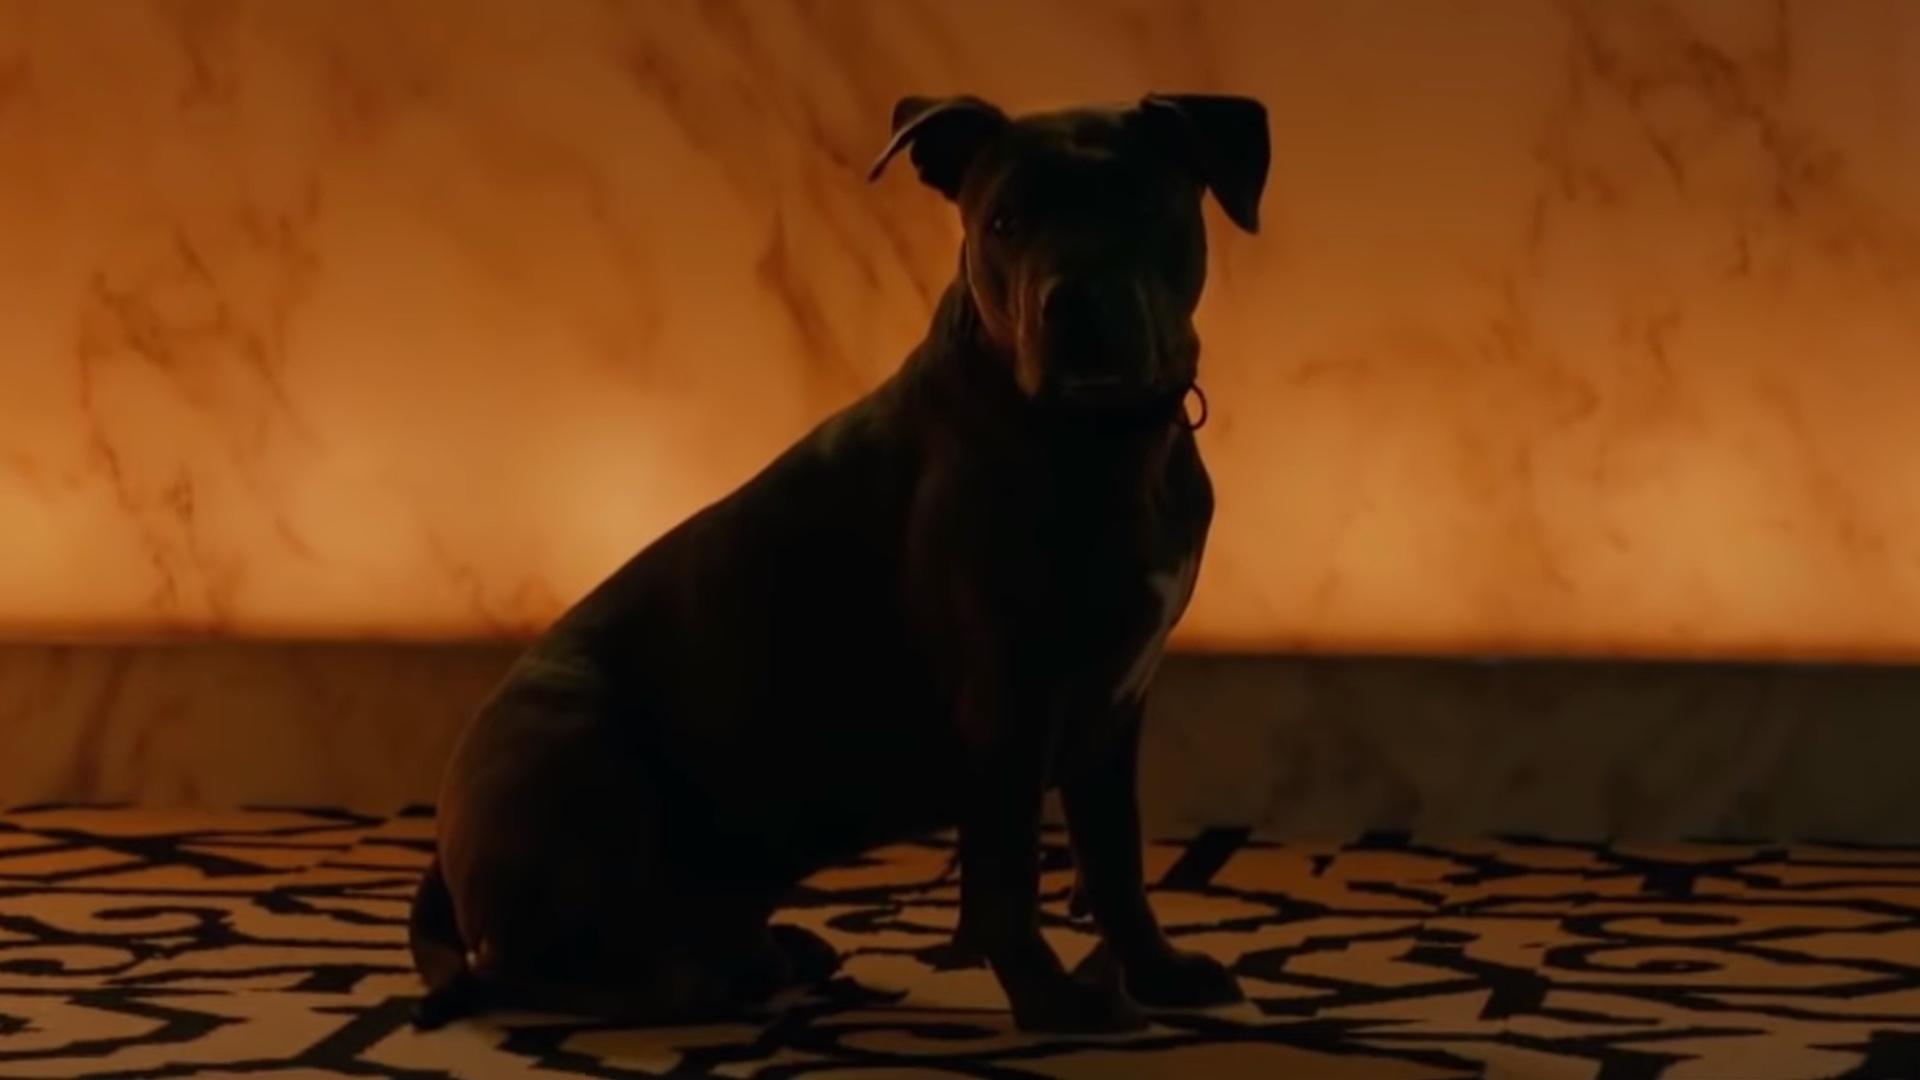 John Wick: Chapter 3 - Parabellum (2019 Movie) “Happy National Puppy Day” -  Keanu Reeves 